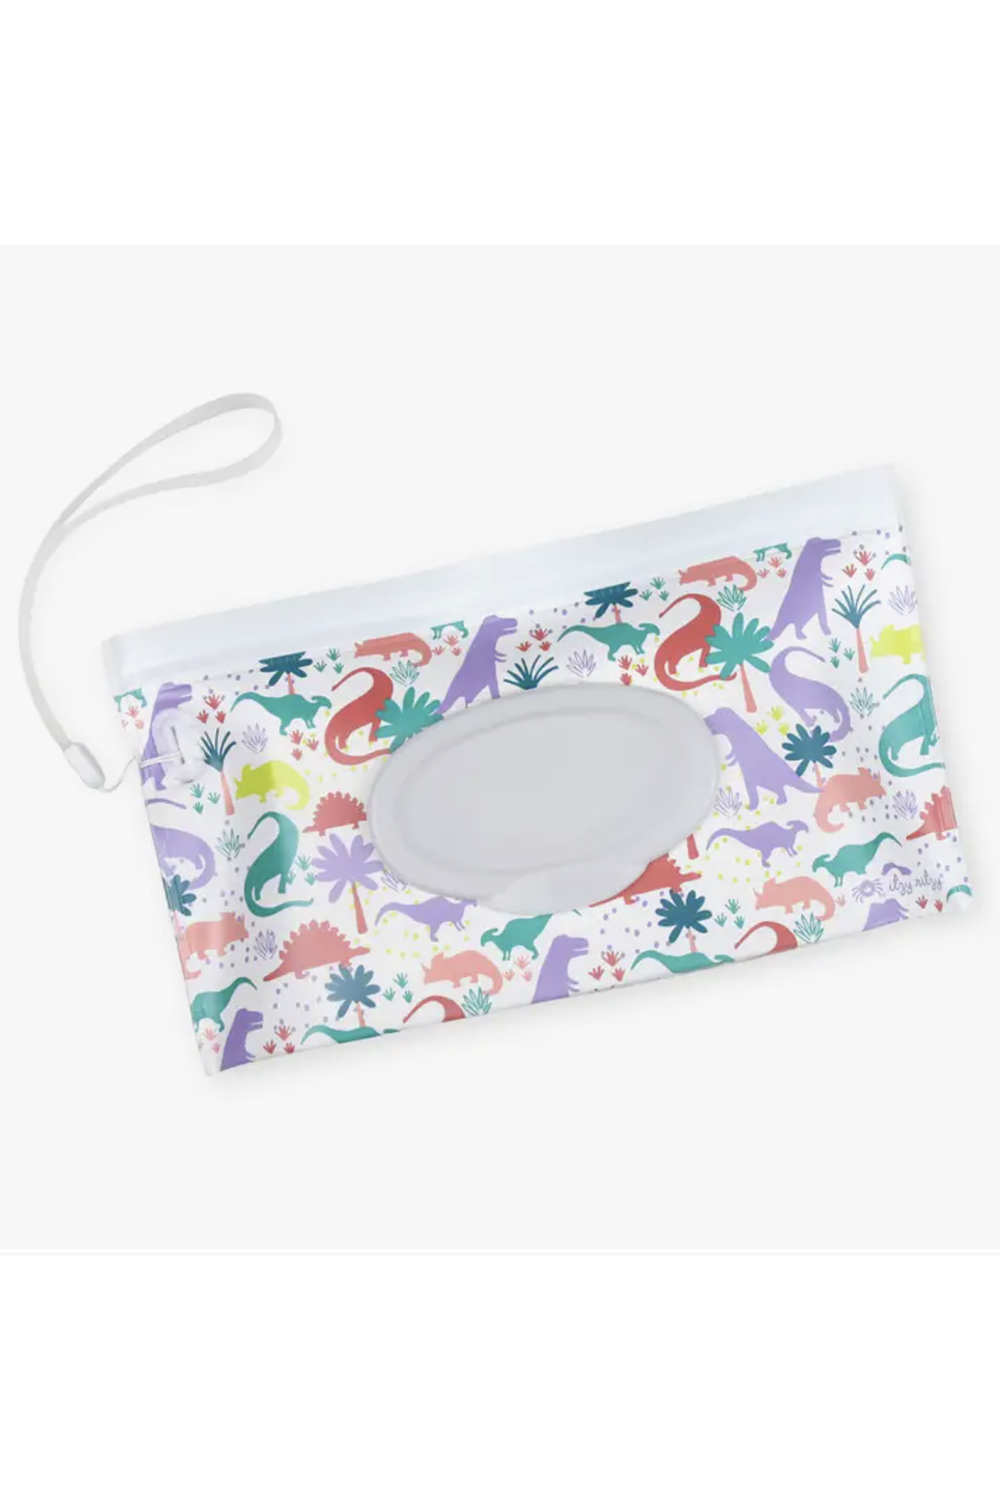 Take + Travel Reusable Wipes Pouch - Darling Dinos